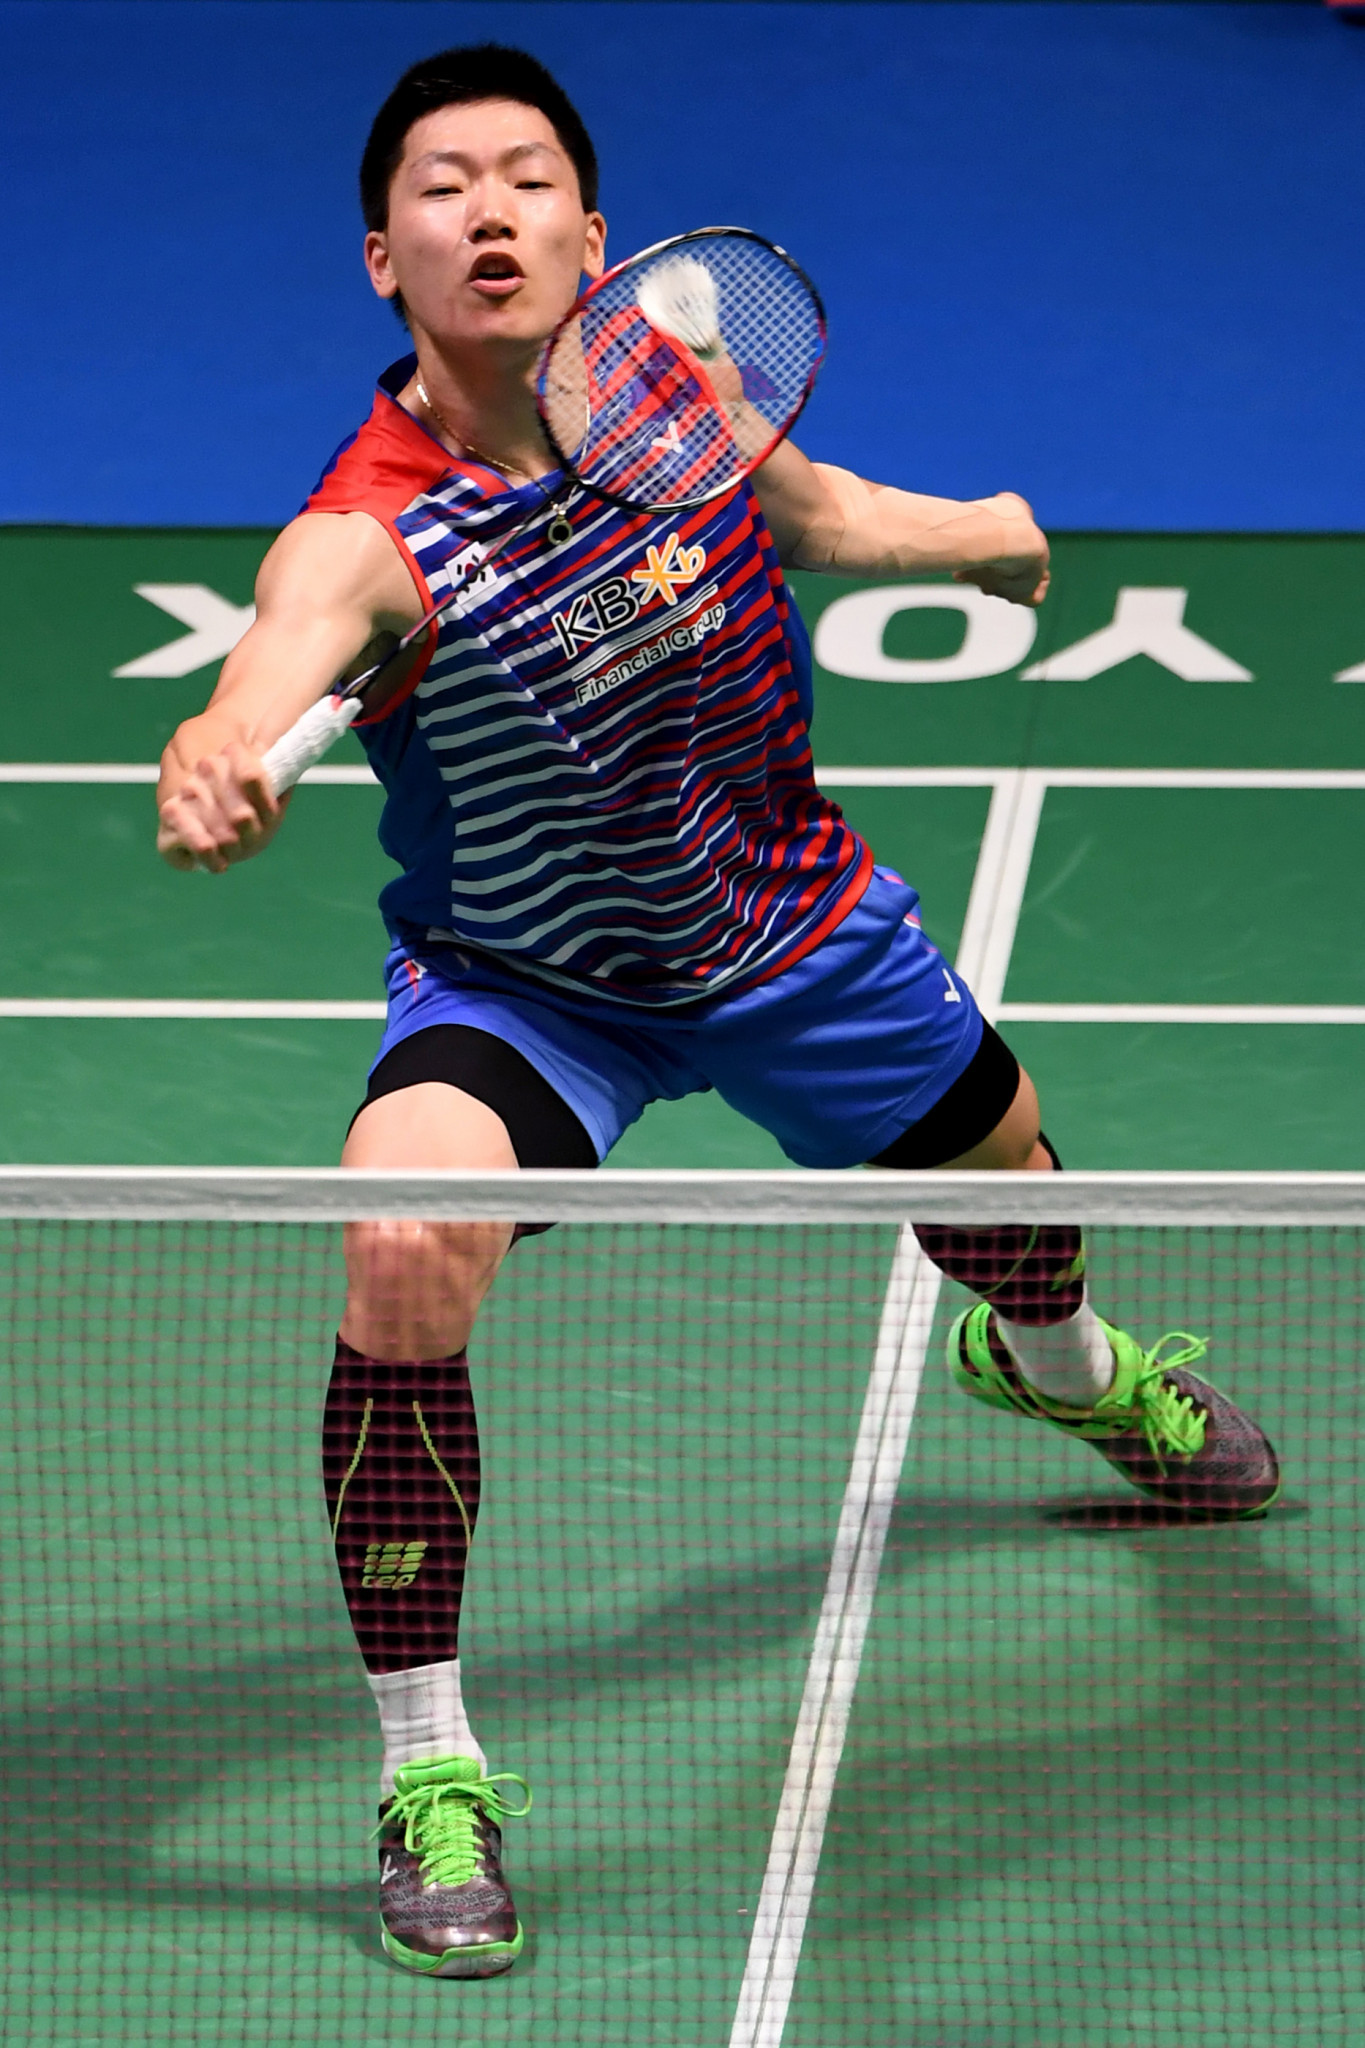 Hosts enjoy strong day of qualification at BWF China Open